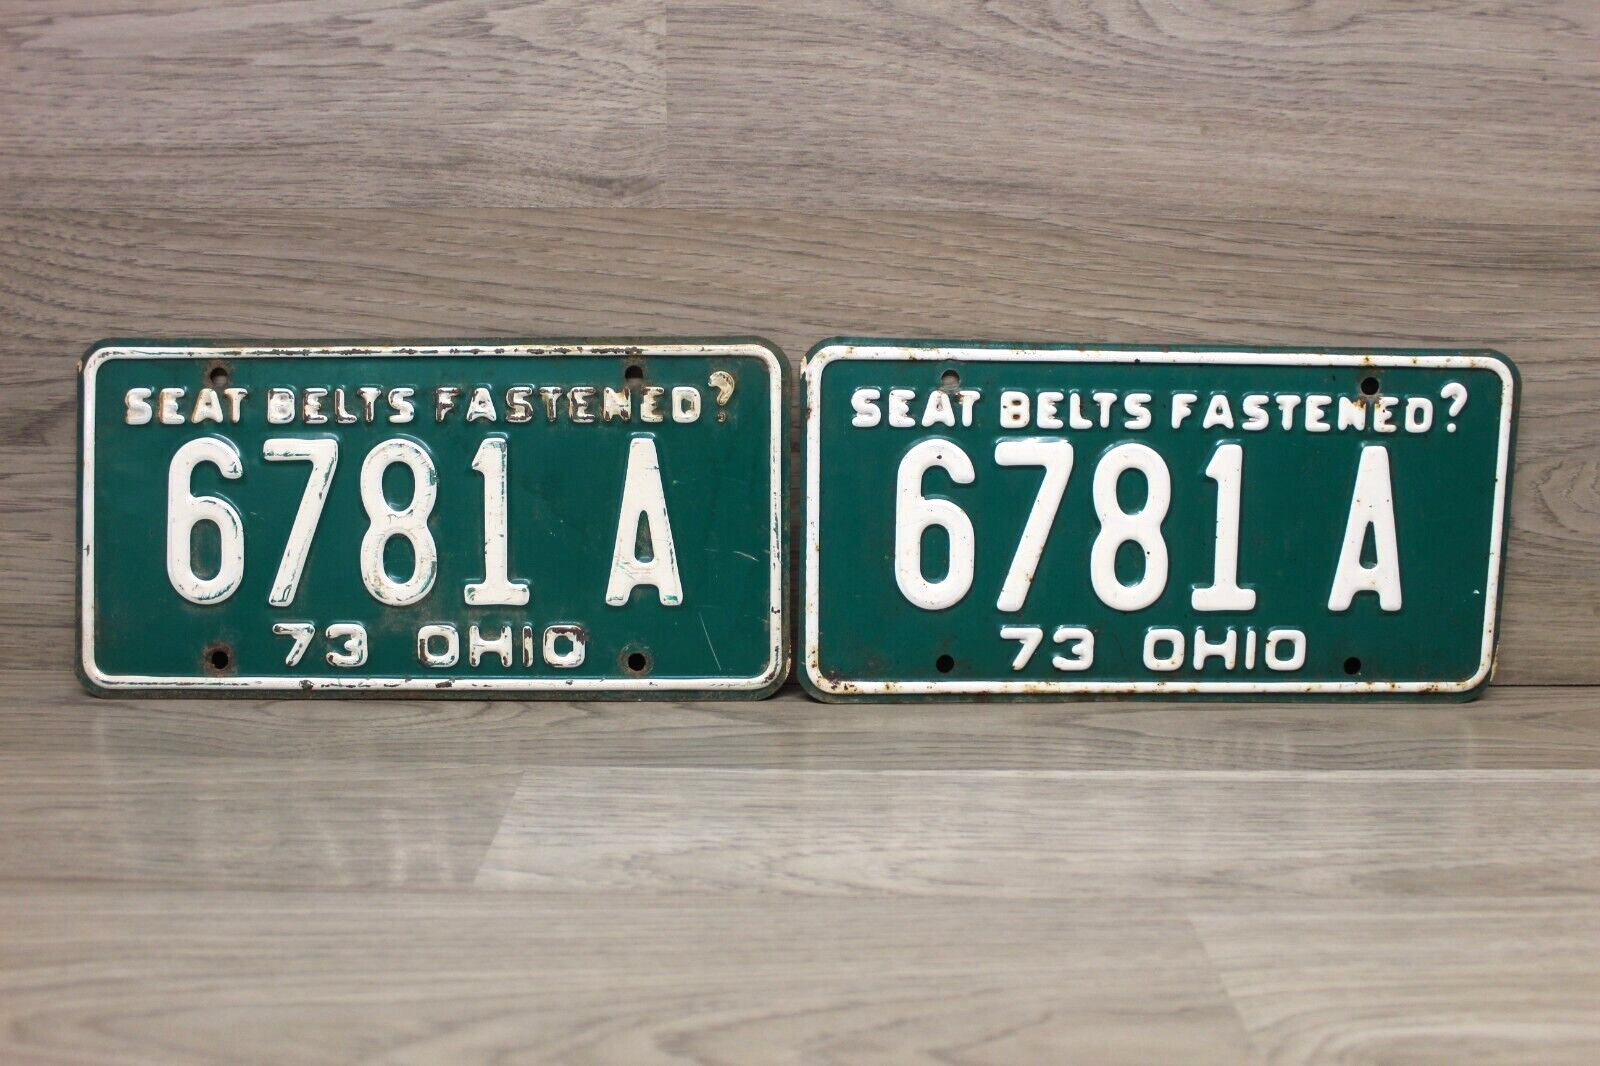 Ohio 1973 SEAT BELTS FASTENED? License Plate Pair 6781 A